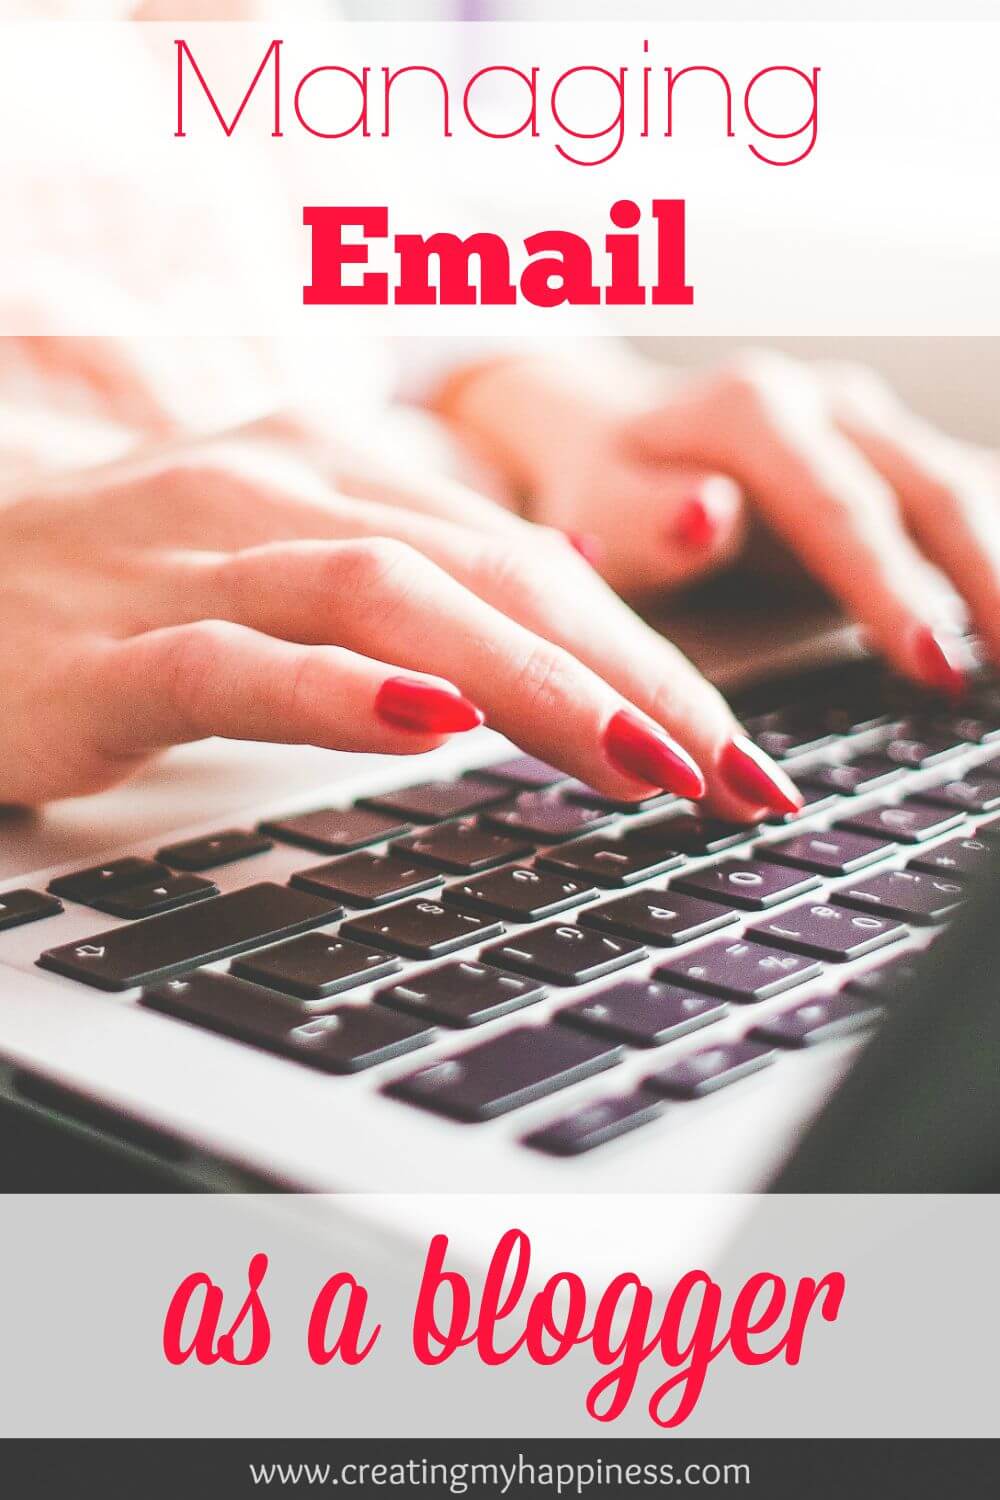 As a blogger, managing email can be a tricky balancing act. Read on for helpful tips on how to avoid email overwhelm.